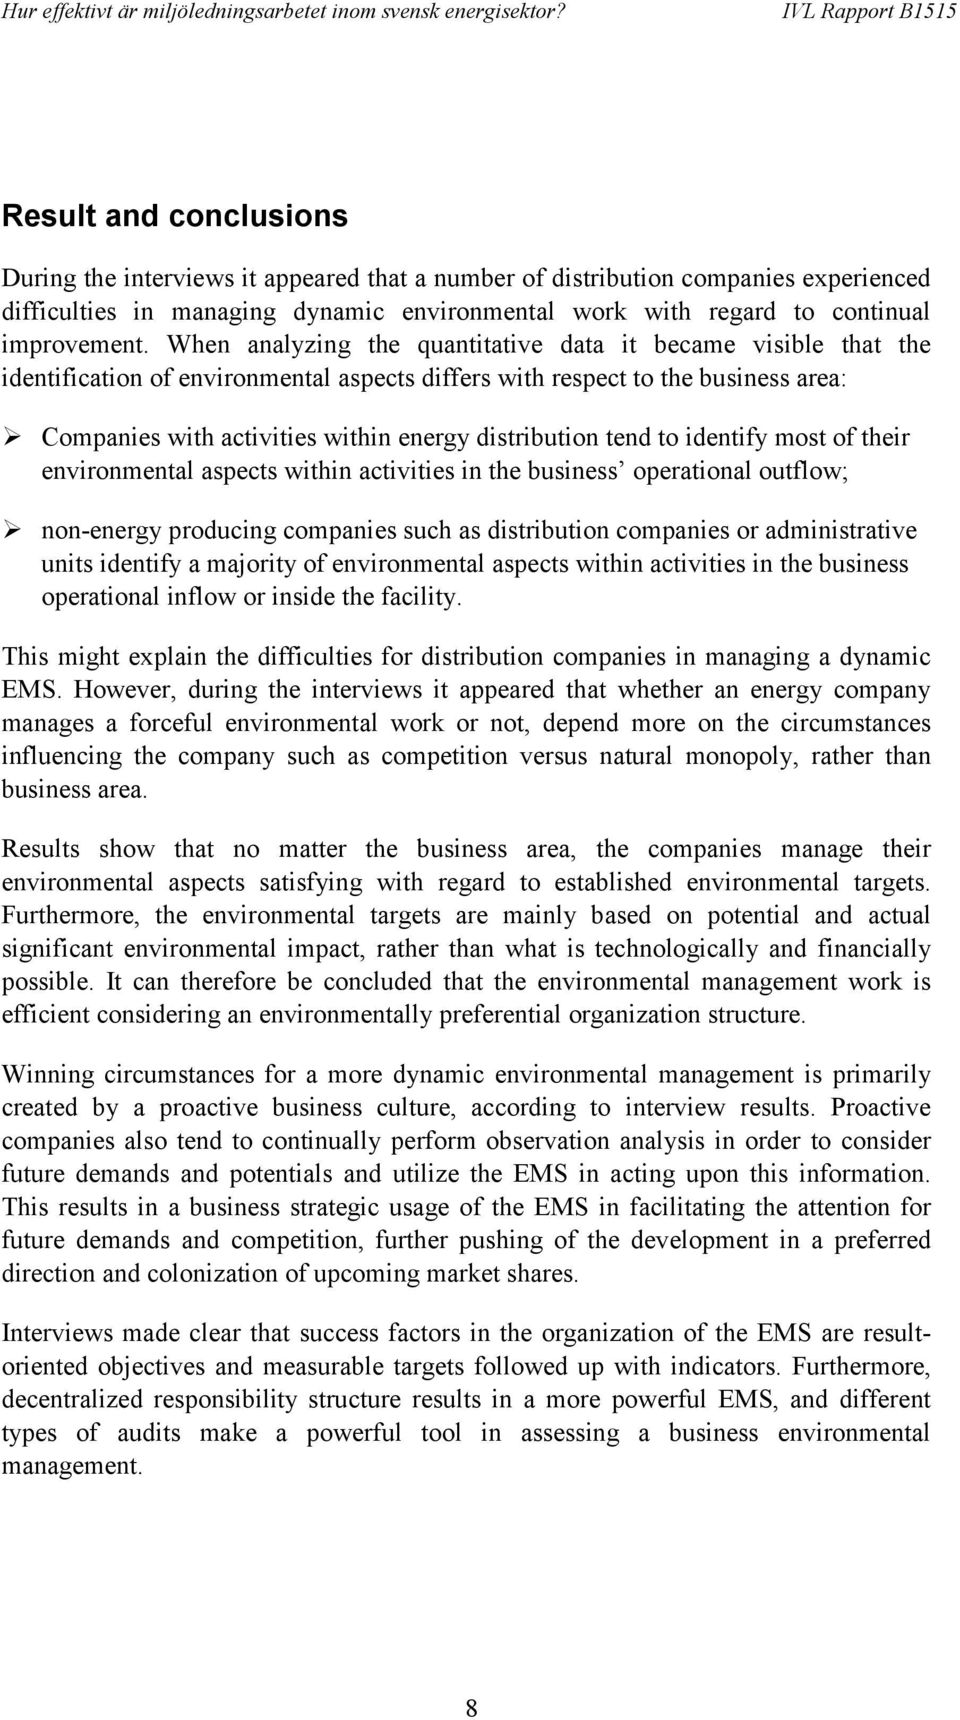 Companies with activities within energy distribution tend to identify most of their environmental aspects within activities in the business operational outflow;!